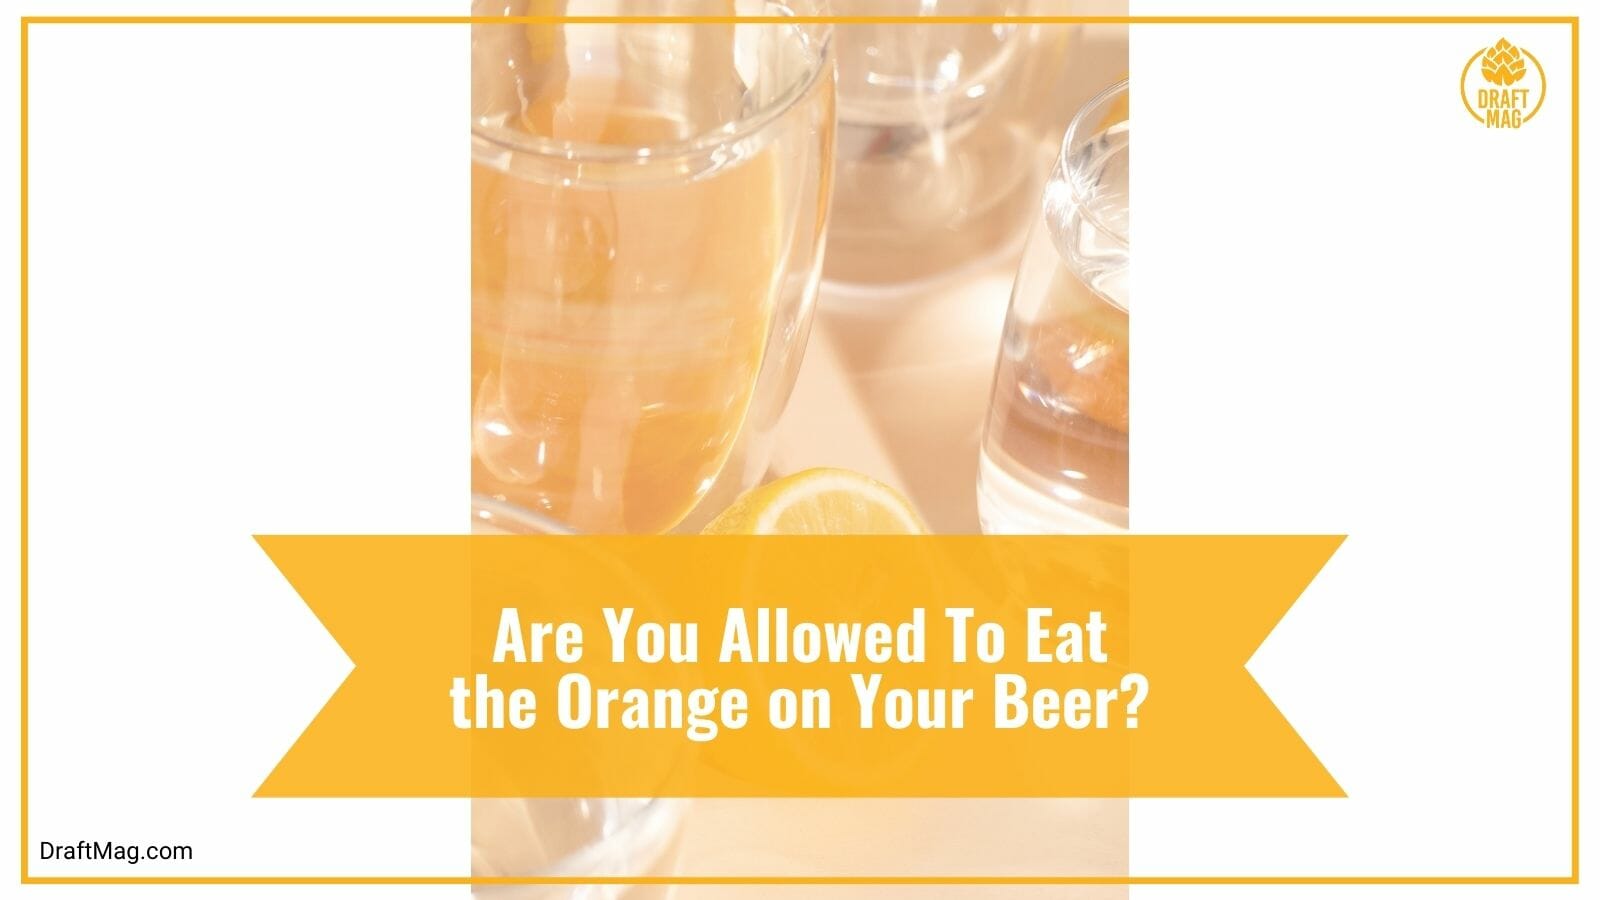 Are You Allowed To Eat the Orange on Your Beer